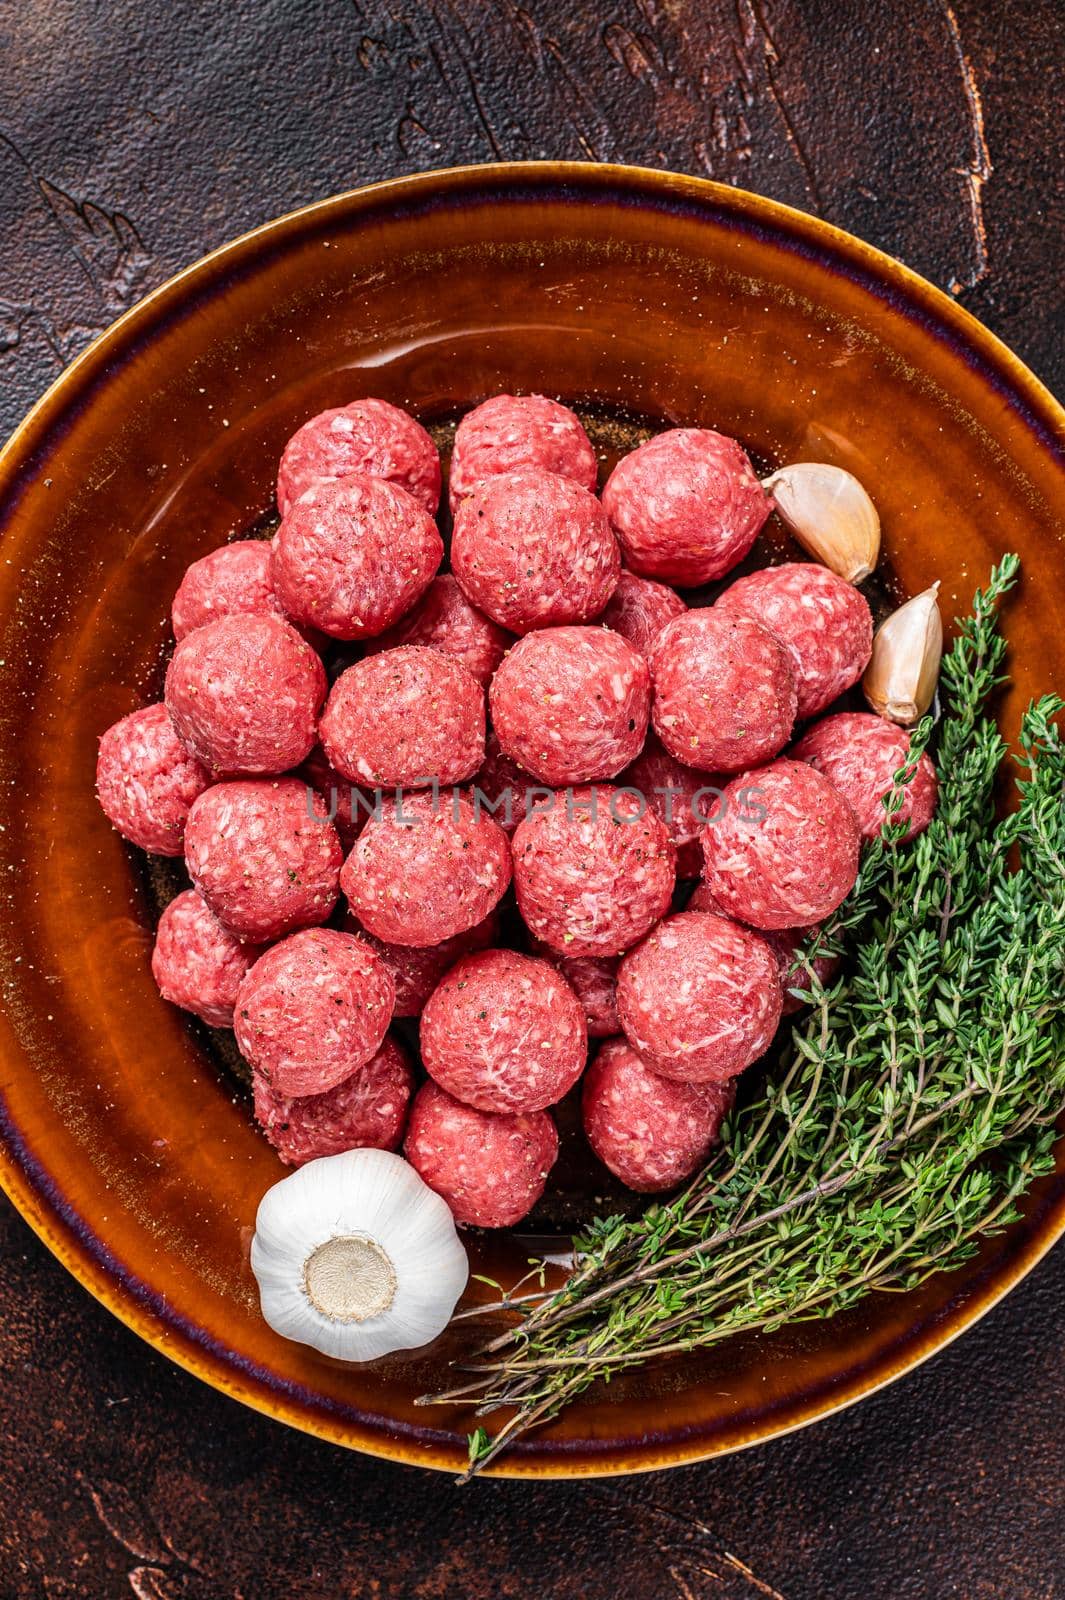 Raw meatballs from mince lamb mutton meat with thyme on rustic plate. Dark background. Top view.